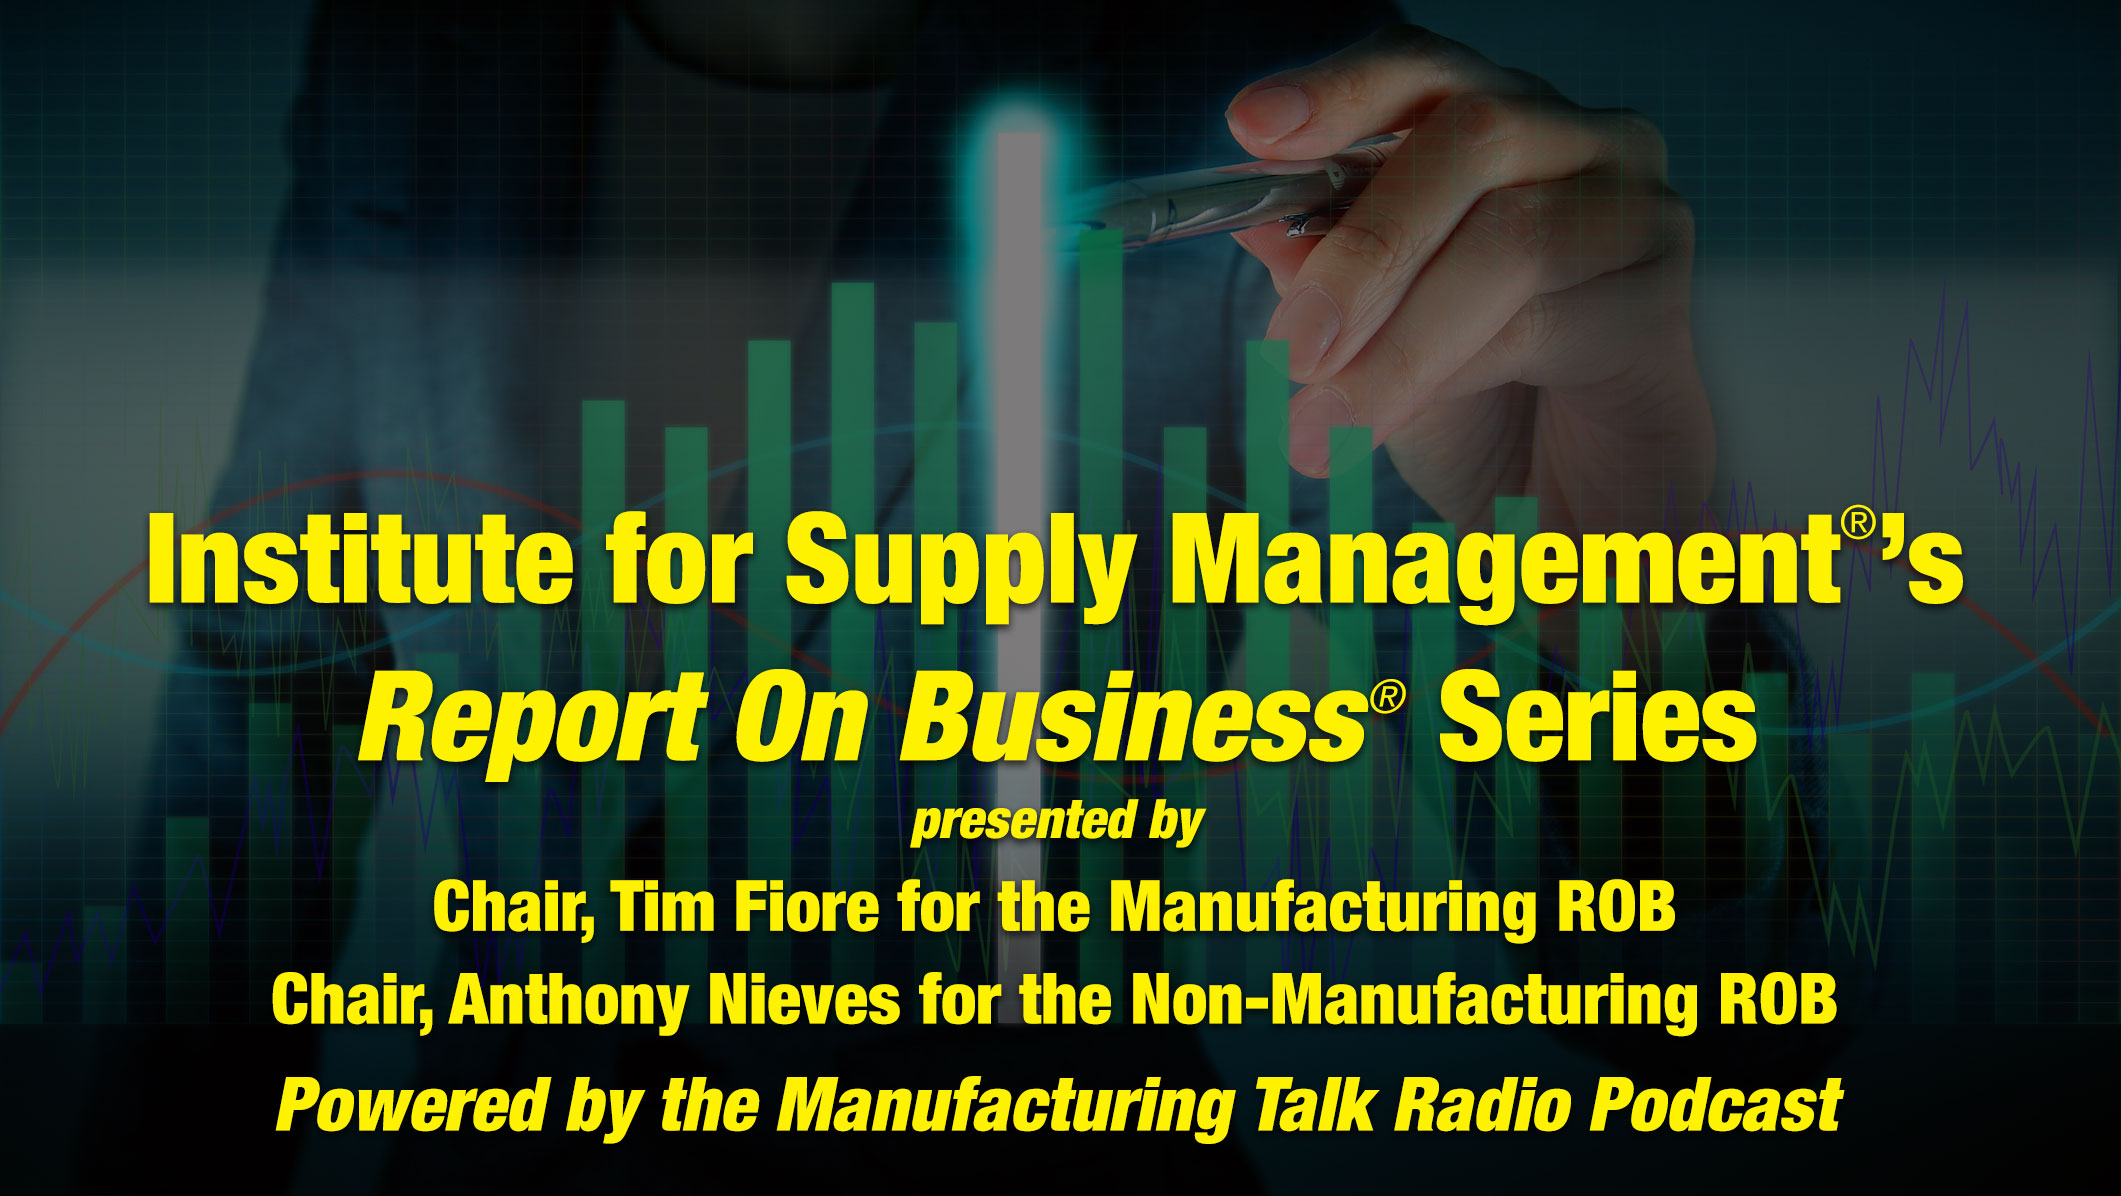 The ISM Services PMI™ Report On Business